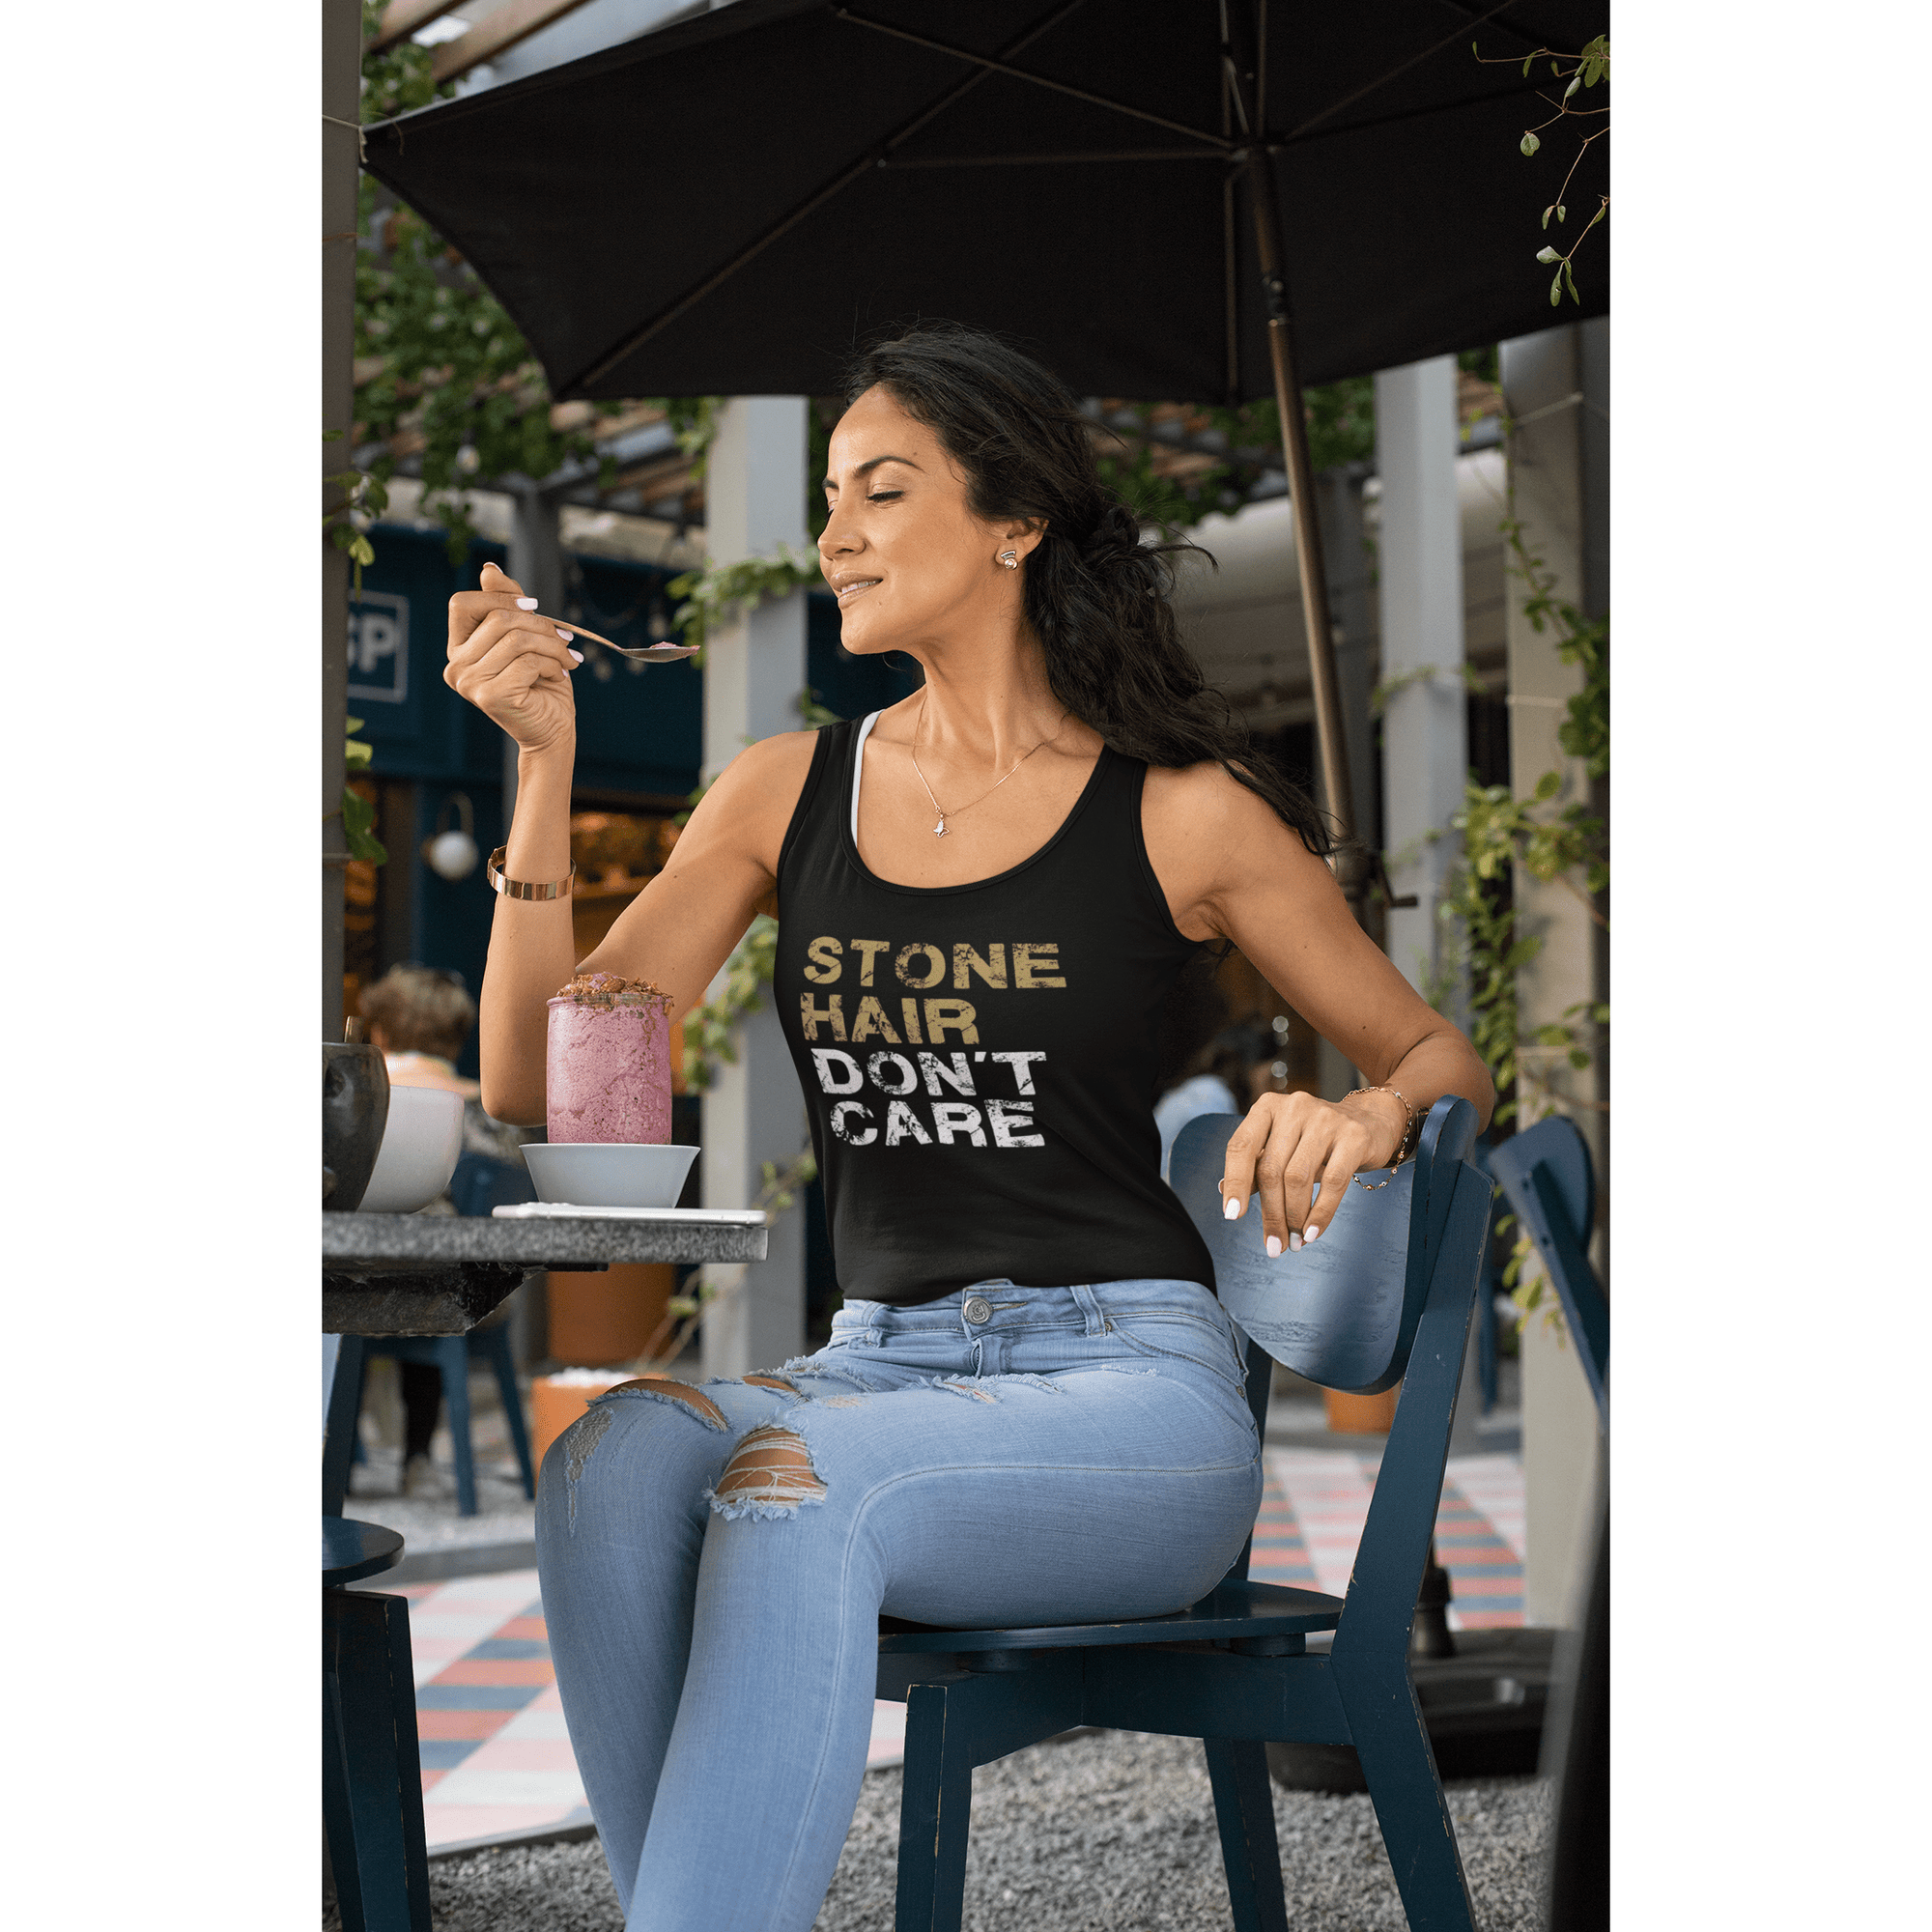 Tank Top "Stone Hair Don't Care" Unisex Jersey Tank Top